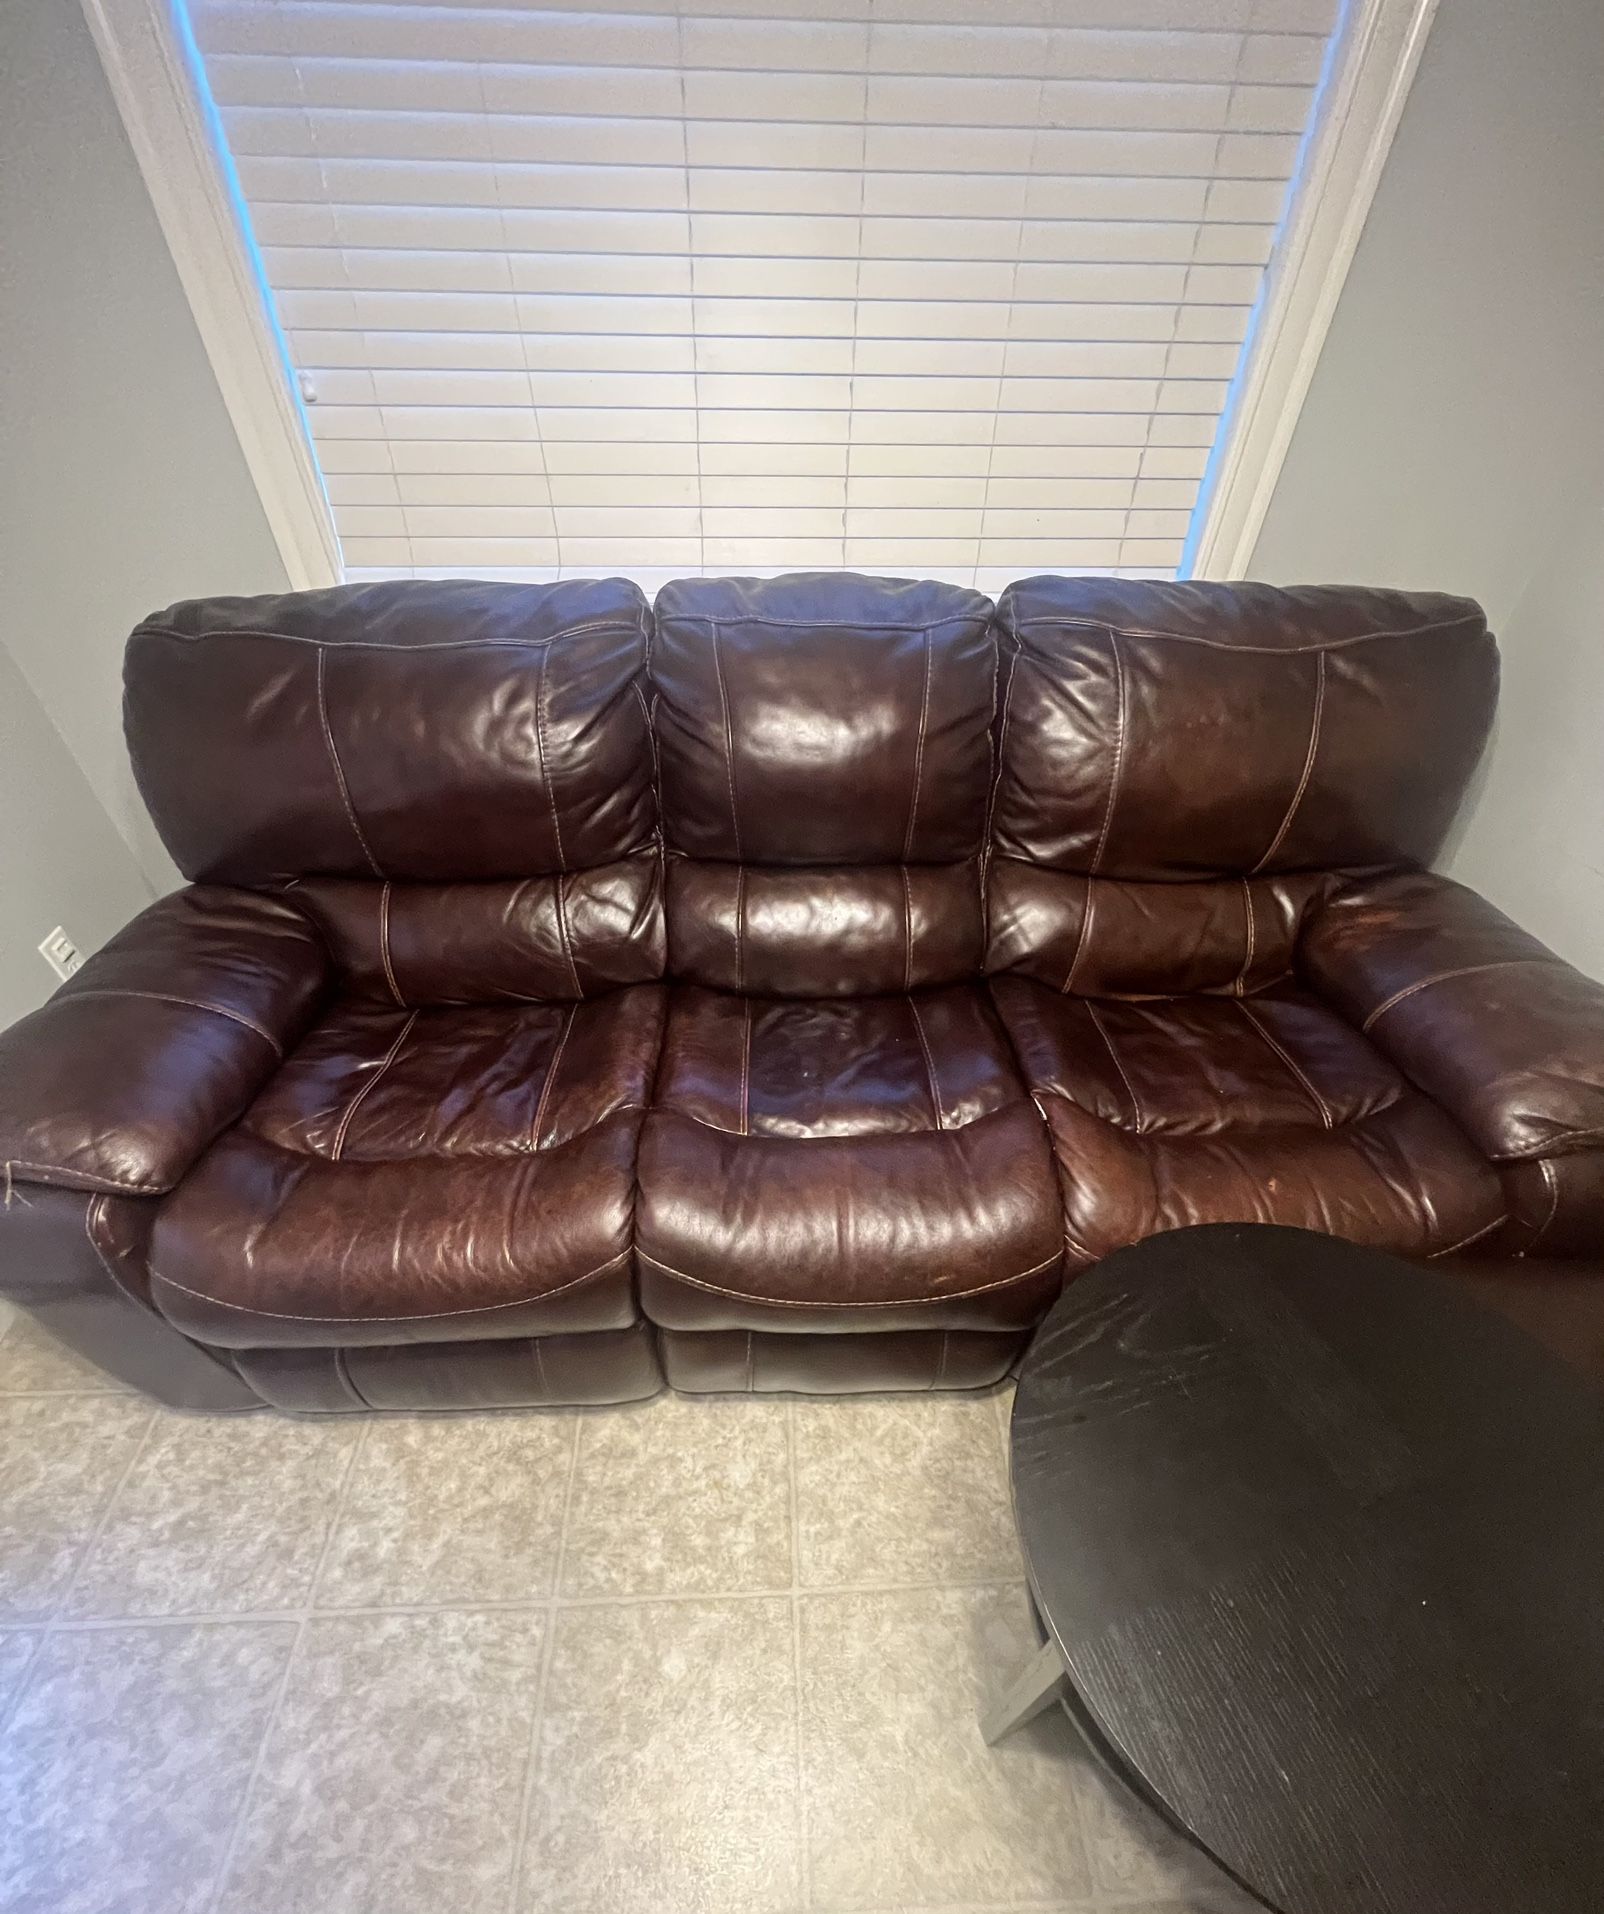 Reclining Leather Couches